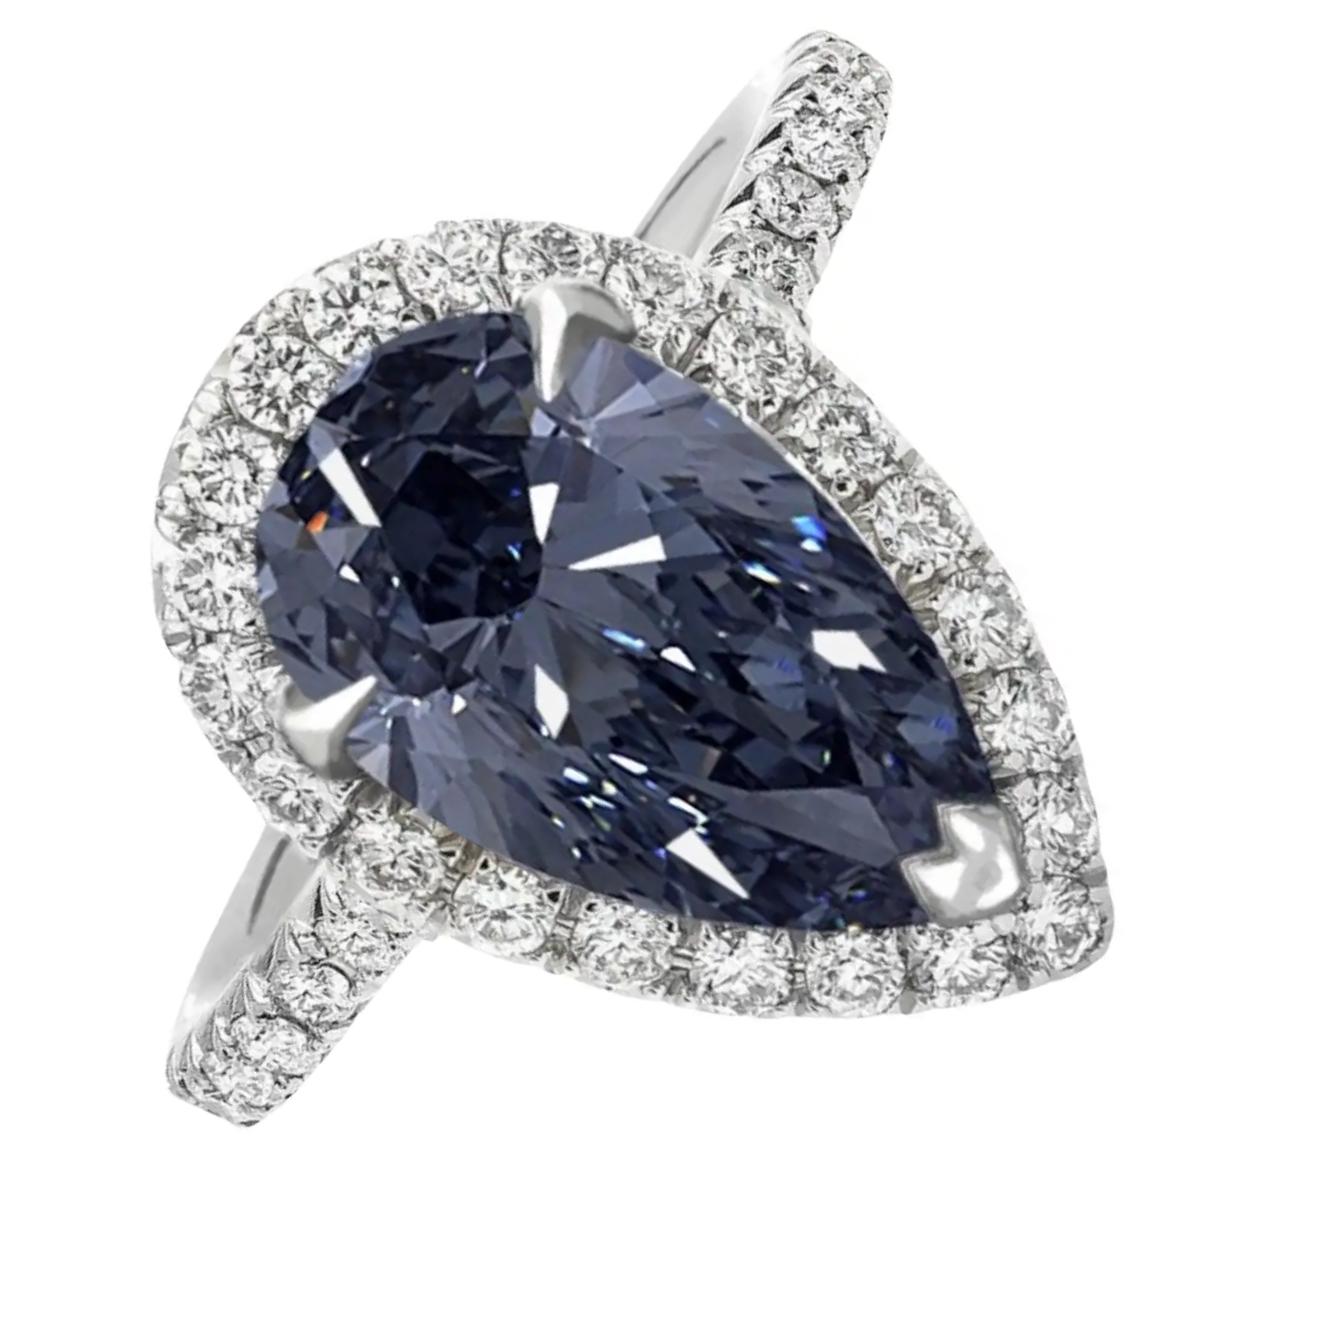 Pear Cut Exceptional GIA Certified 1 Carat Fancy Intense Blue Diamond Ring For Sale